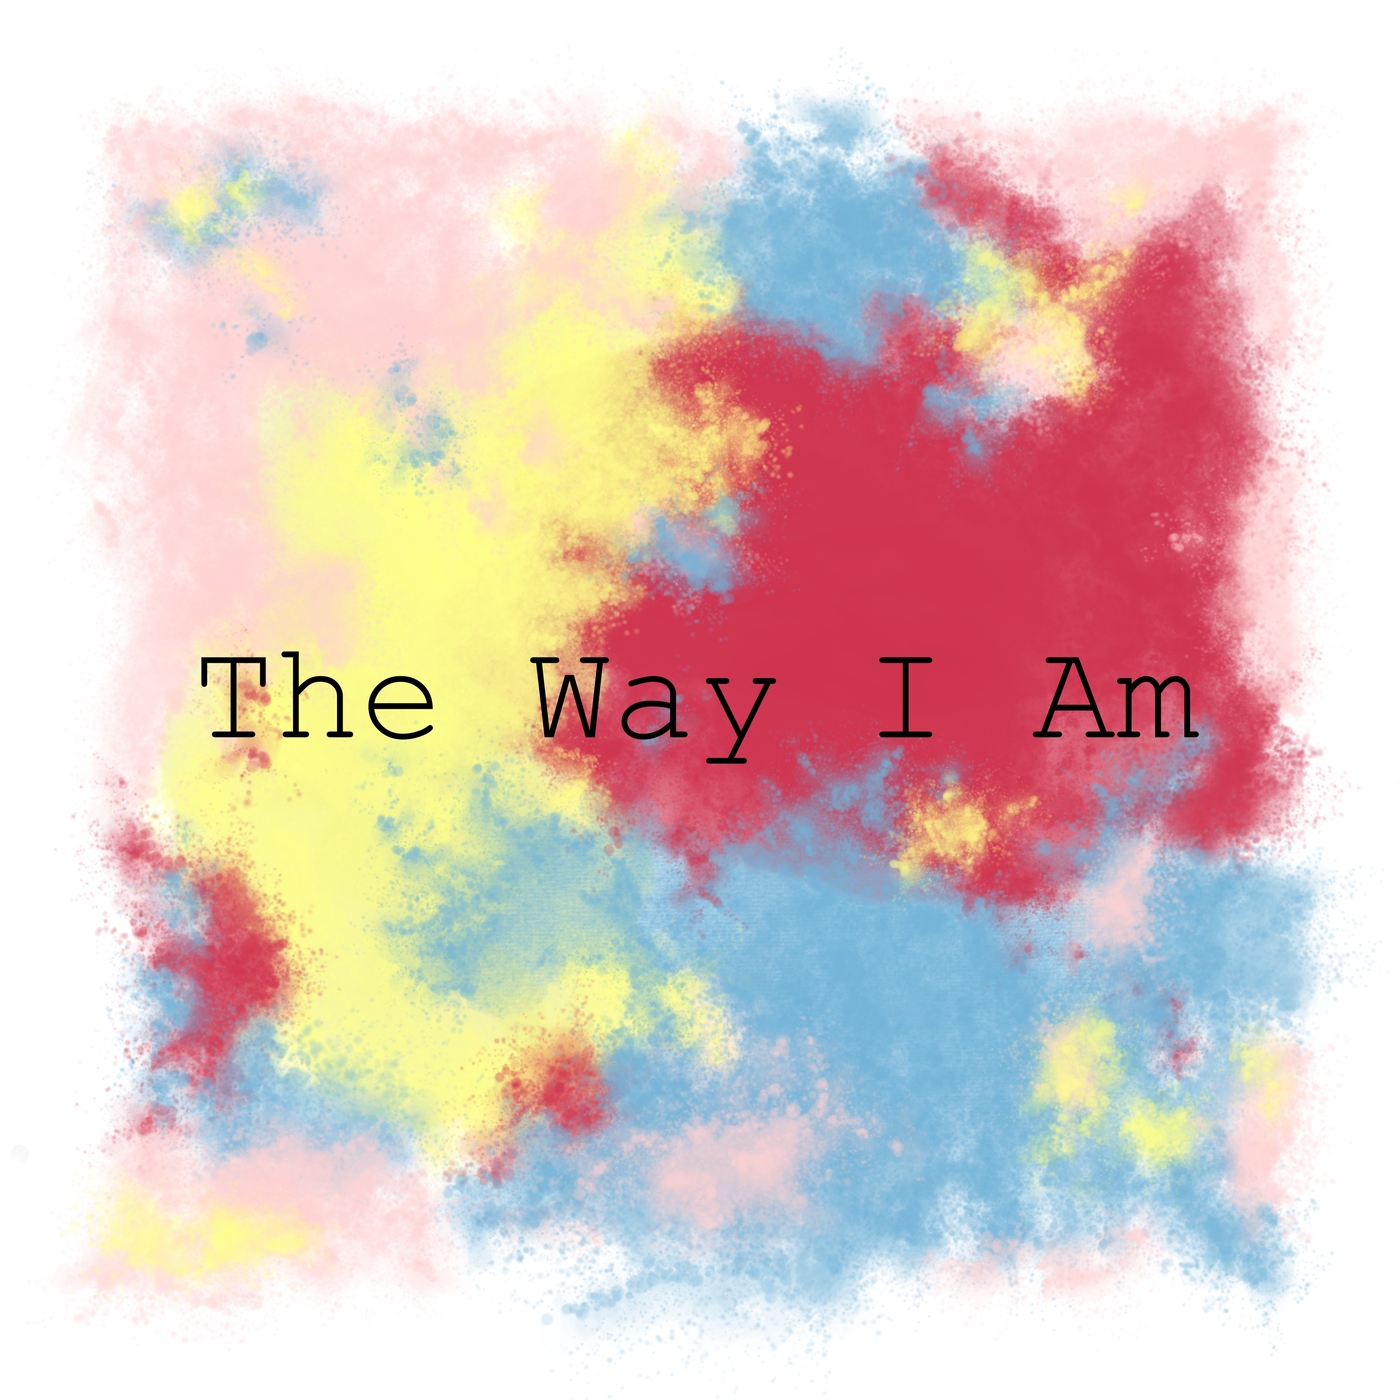 Albumcover, Color blobs in red, blue, yellow and pink (the colors of mata's dresses in the group photo). In the middle is written in black typewriter font 'The Way I Am'.